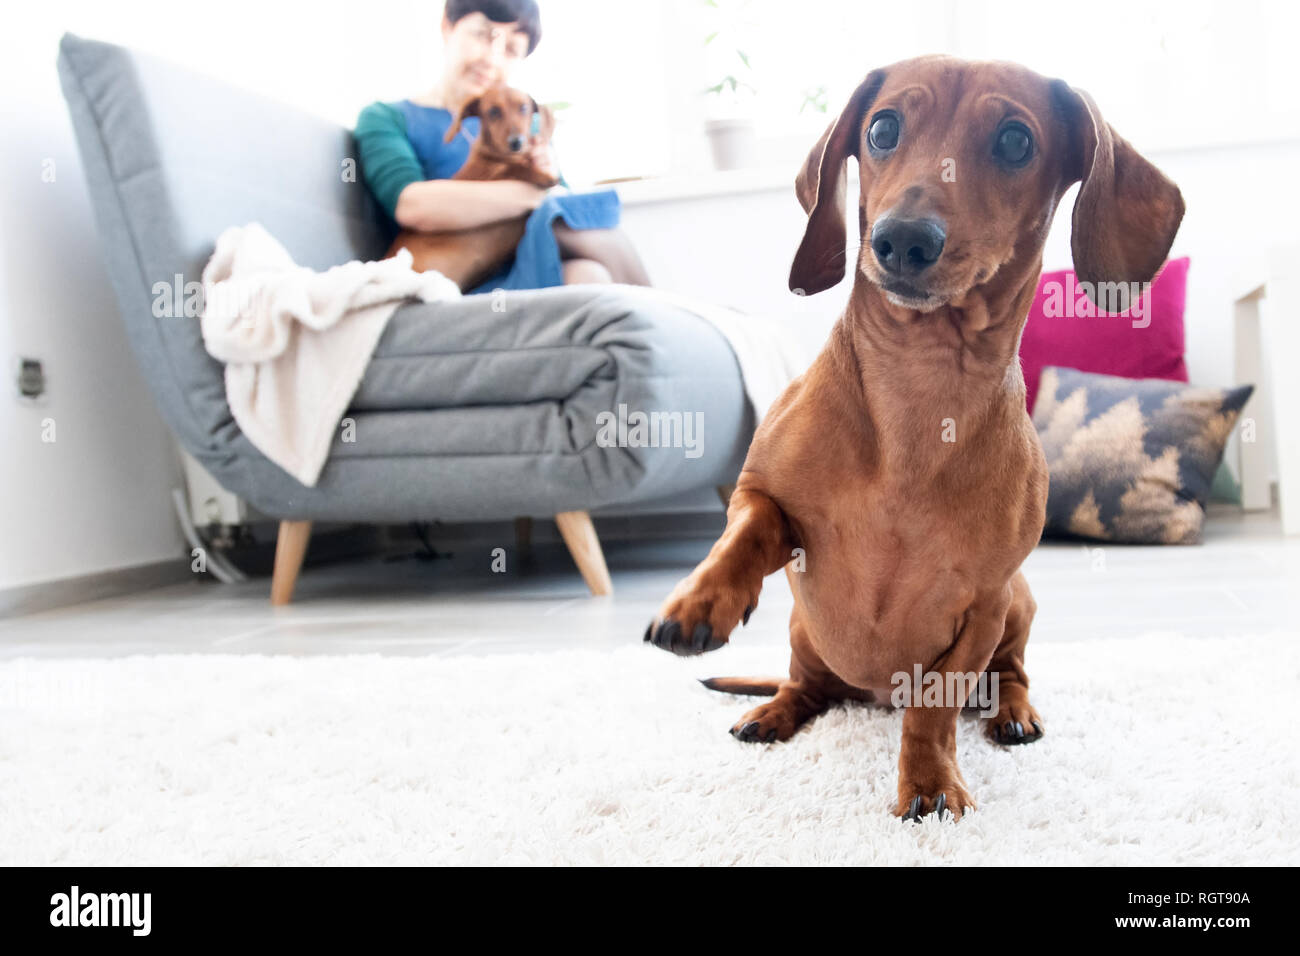 Cute dachshund in room with woman and other dog on background Stock Photo